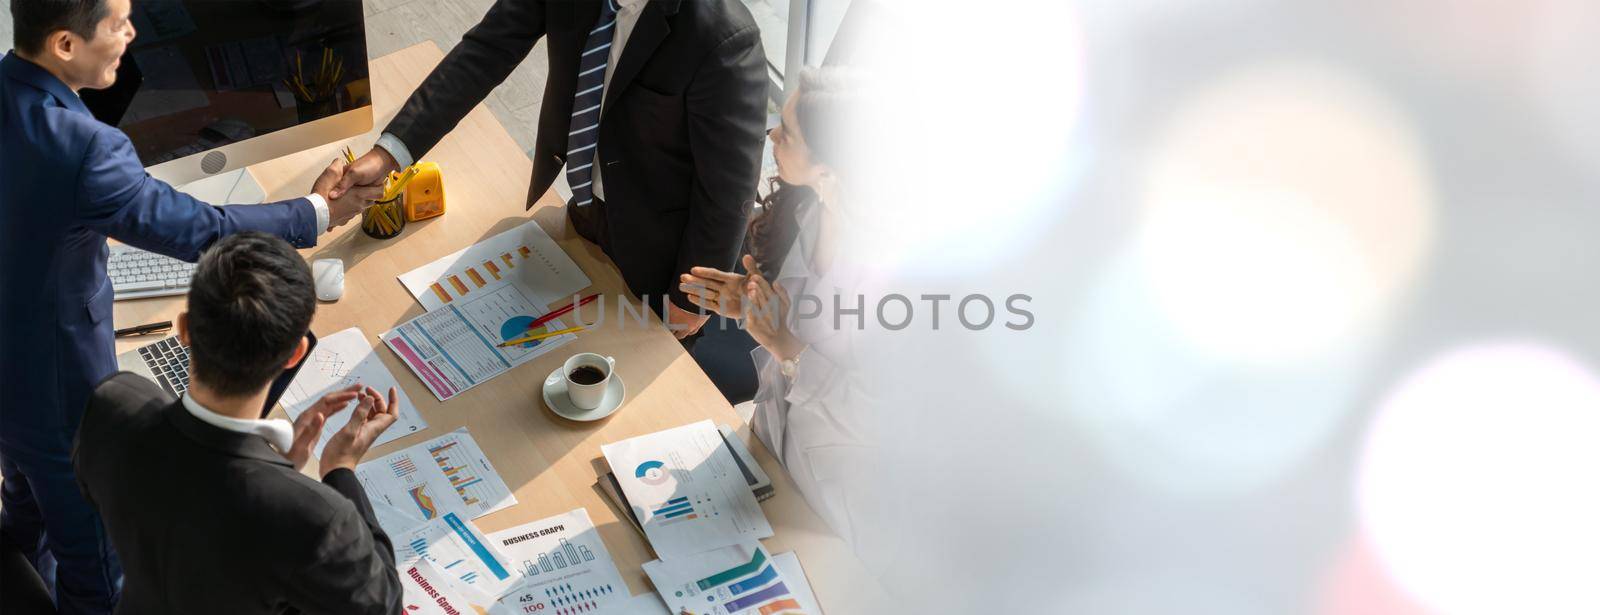 Group business people handshake at meeting table in widen view by biancoblue